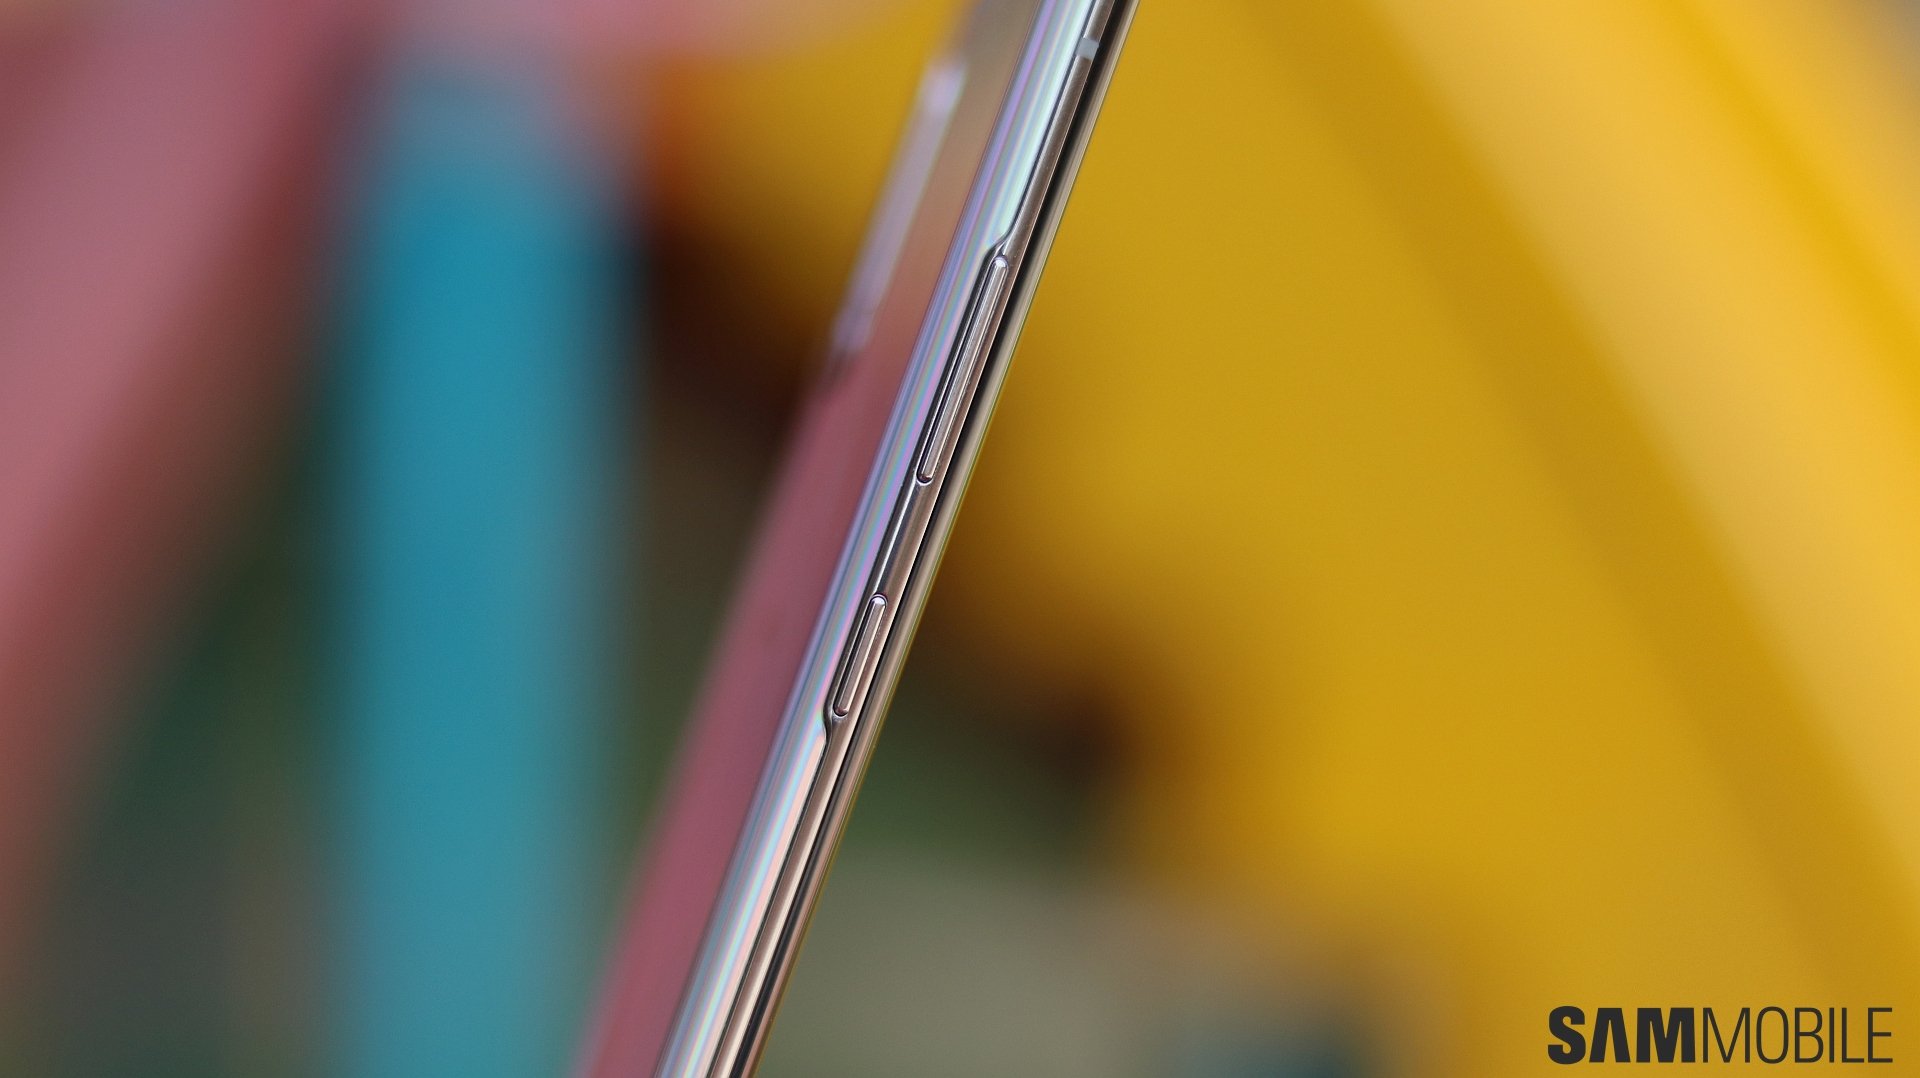 Samsung Galaxy Note 10 Plus review: Big, beautiful, and powerful - SamMobile